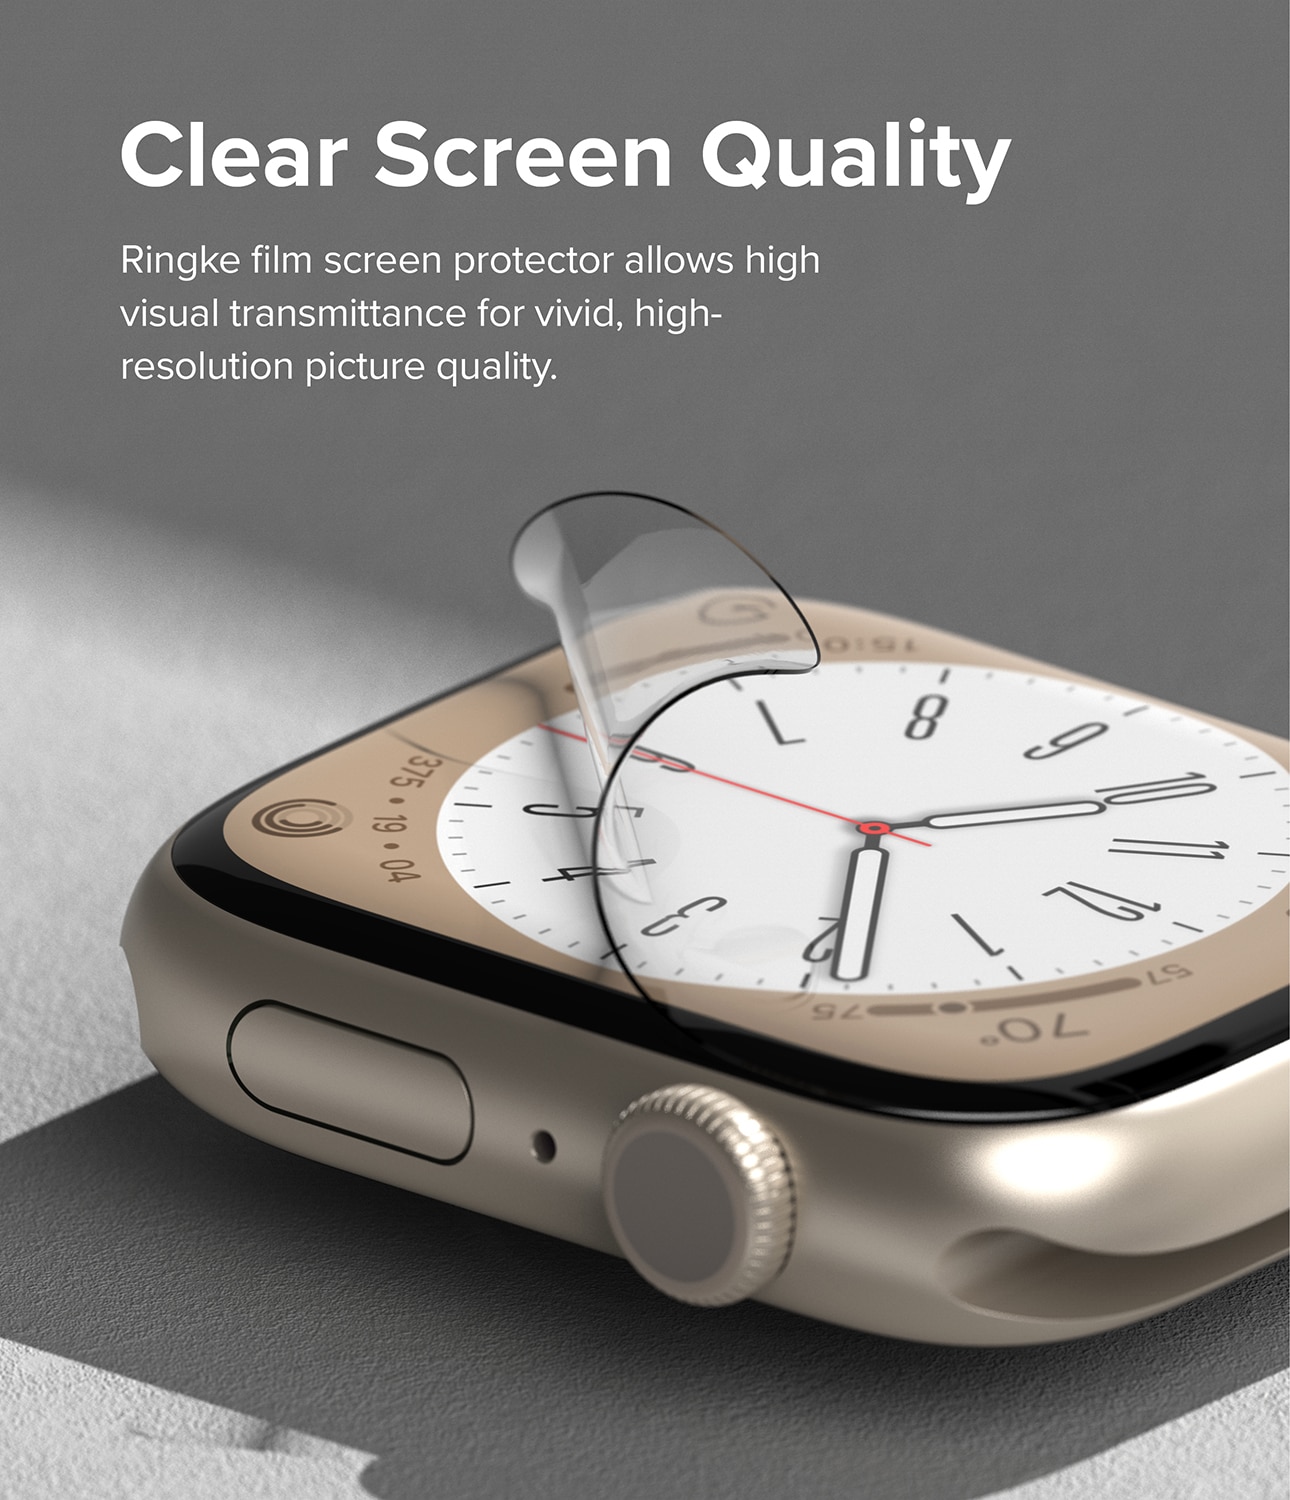 Dual Easy Screen Protector (3 pezzi) Apple Watch SE 40mm